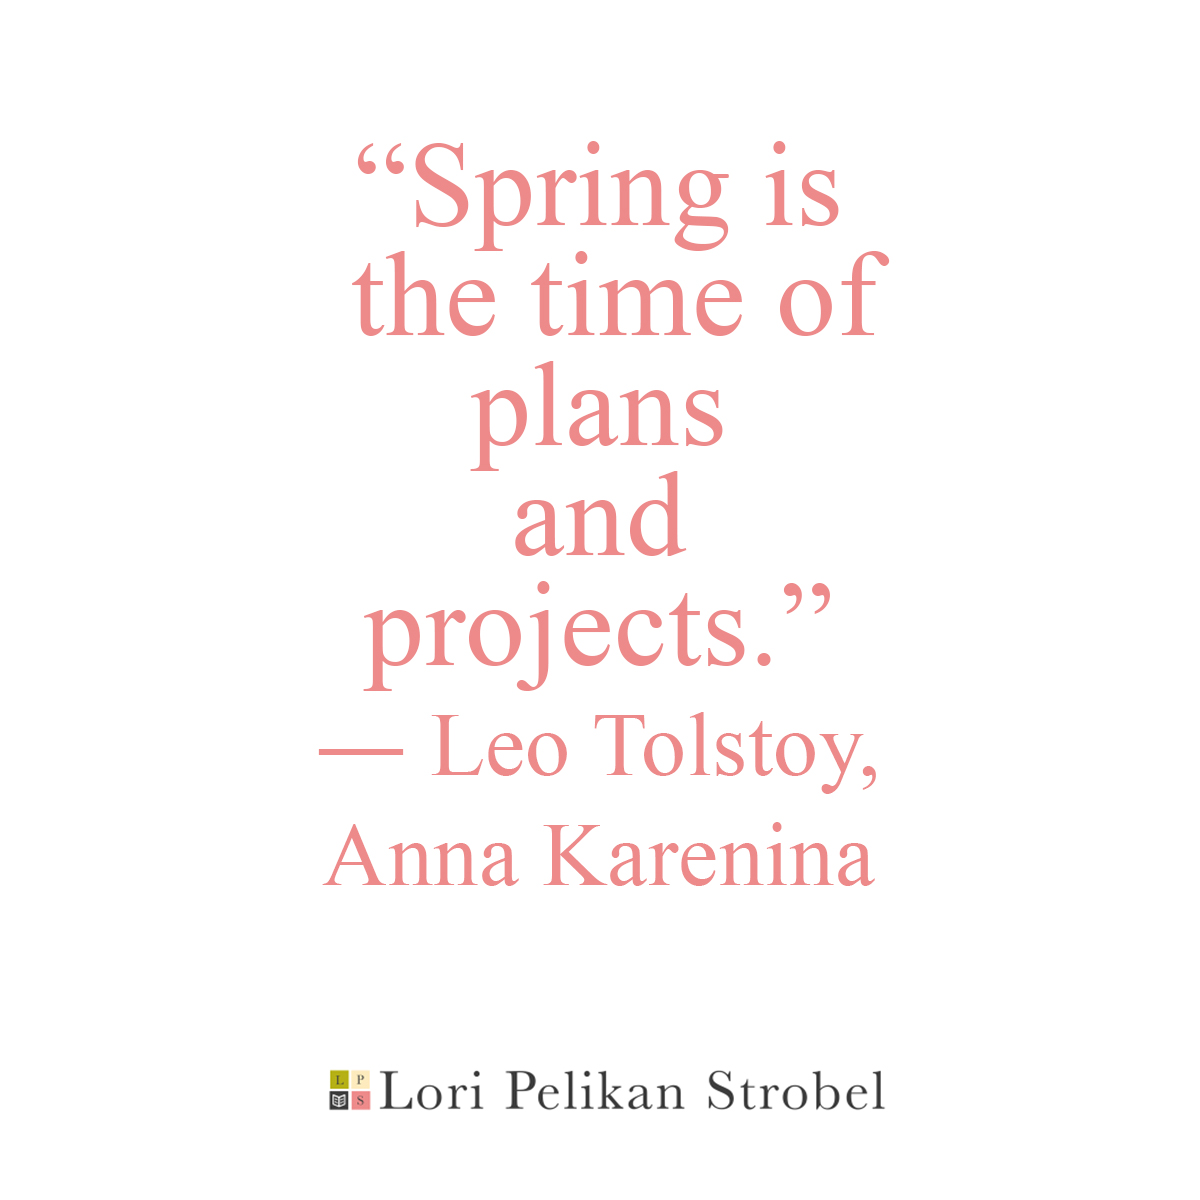 "Spring is the time of plans and projects."